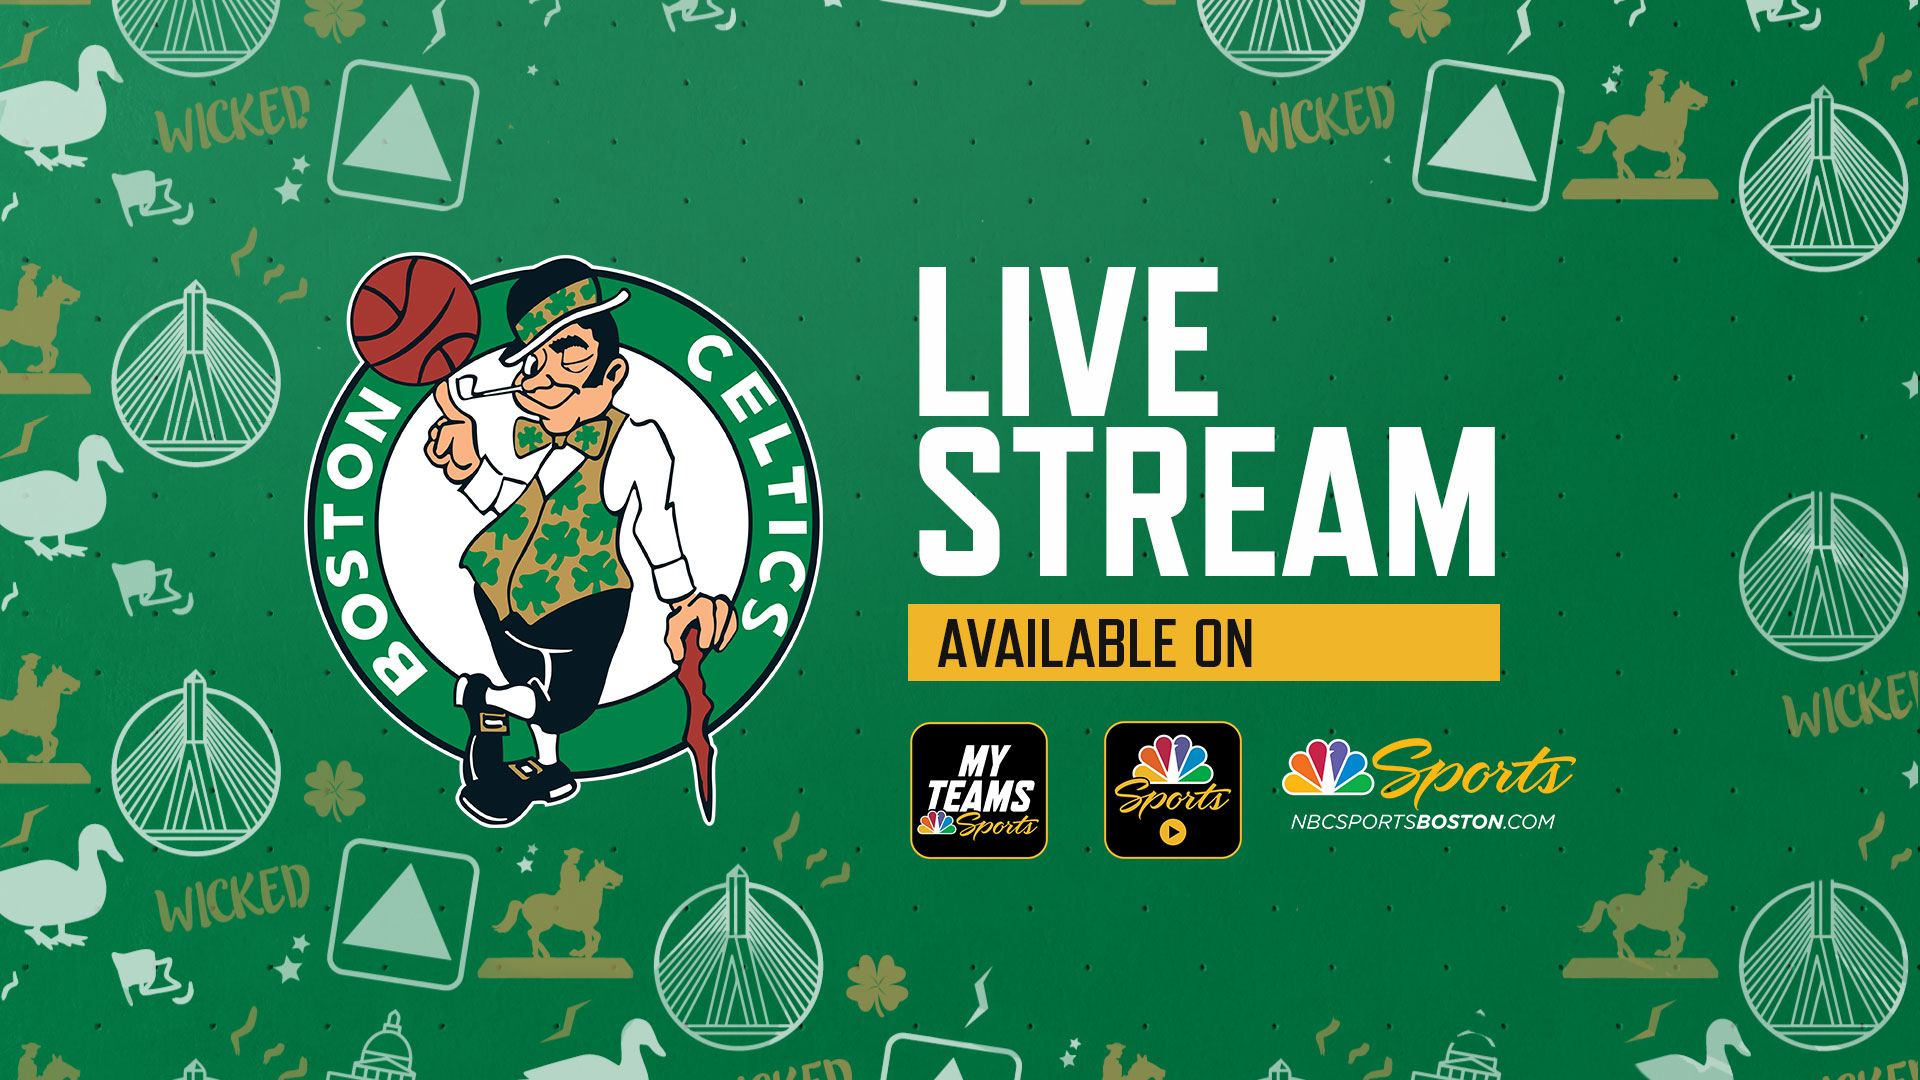 Magic - Celtics: times, how to watch on TV, stream online